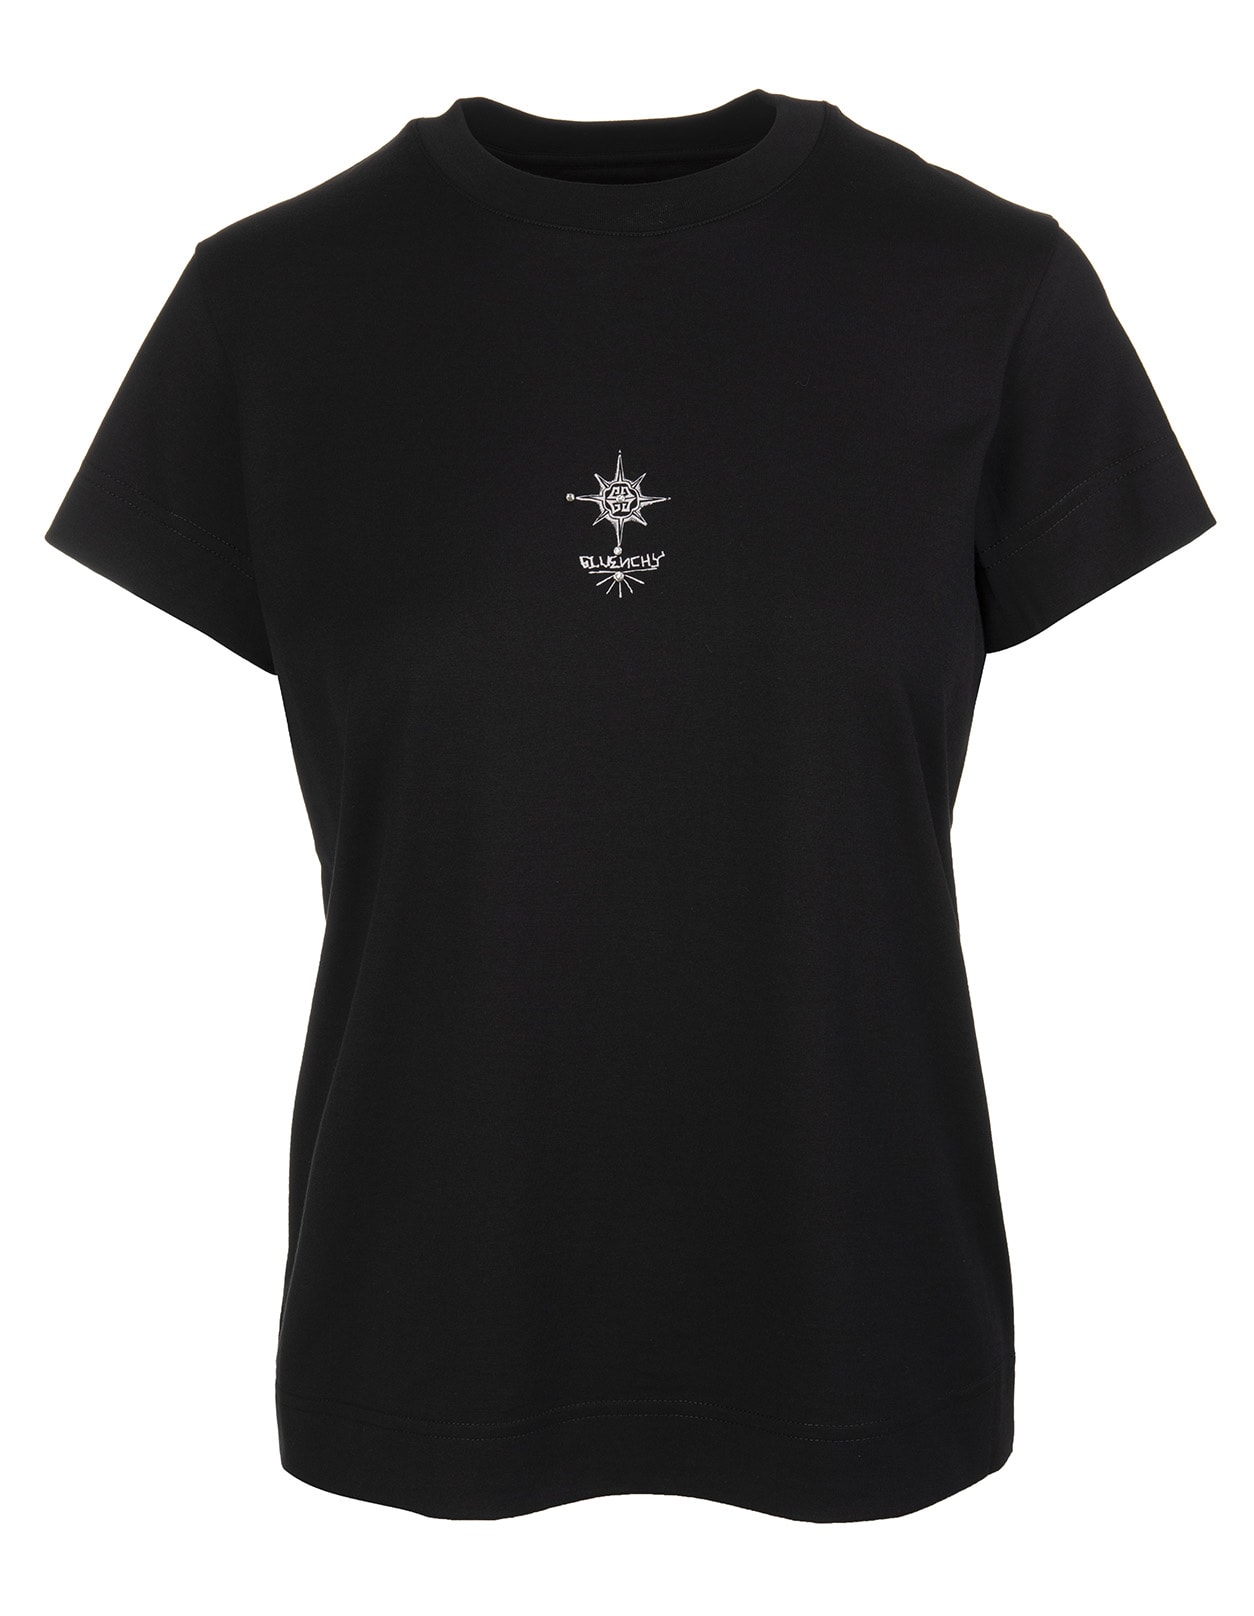 Givenchy Woman Black Slim Fit T-shirt With Metallic Embroidery